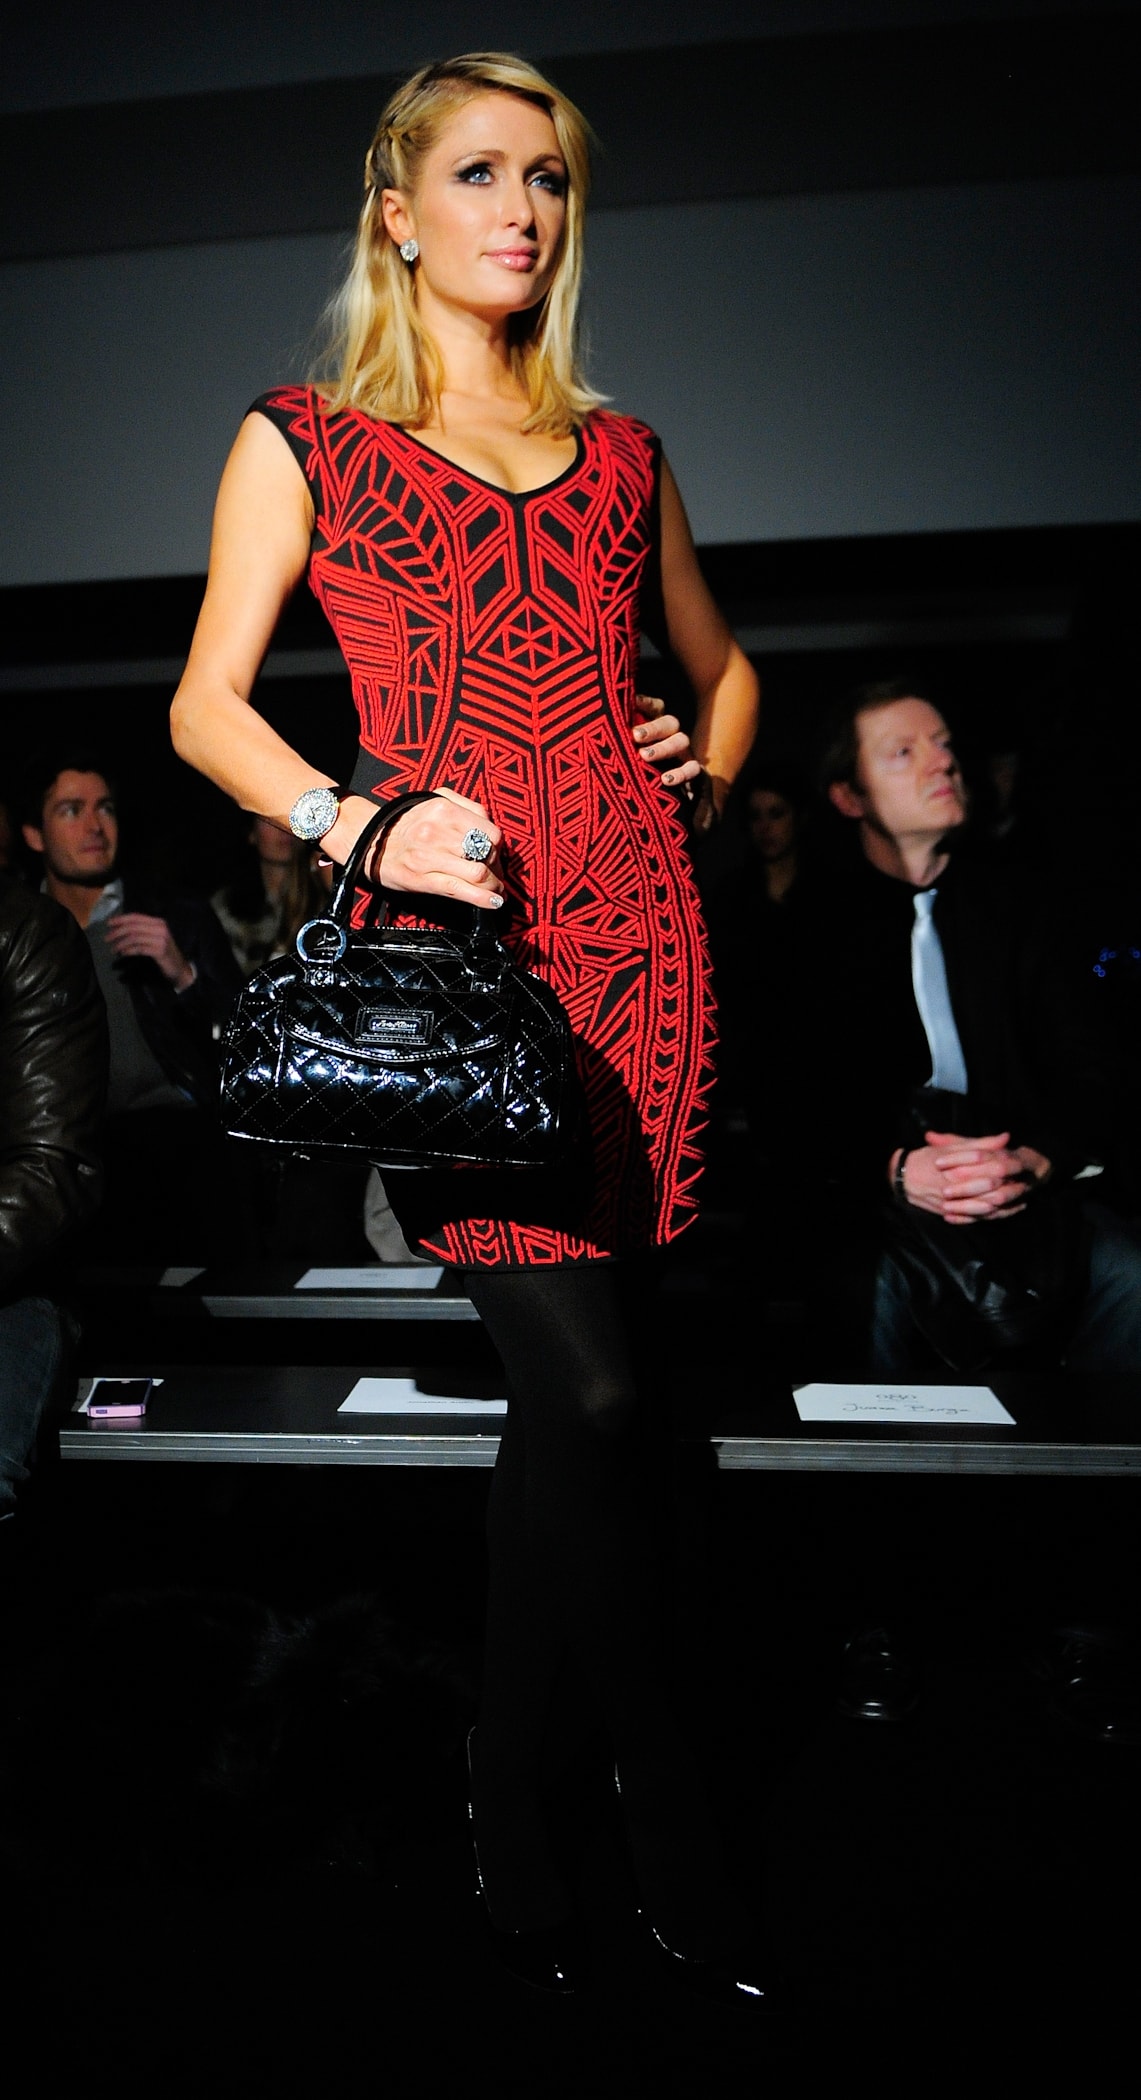 At the Mango Fashion Show in Barcelona on January 28, 2013, Paris Hilton elegantly sported an Rvn abstract jacquard mini dress paired with Prada black patent leather silver heels